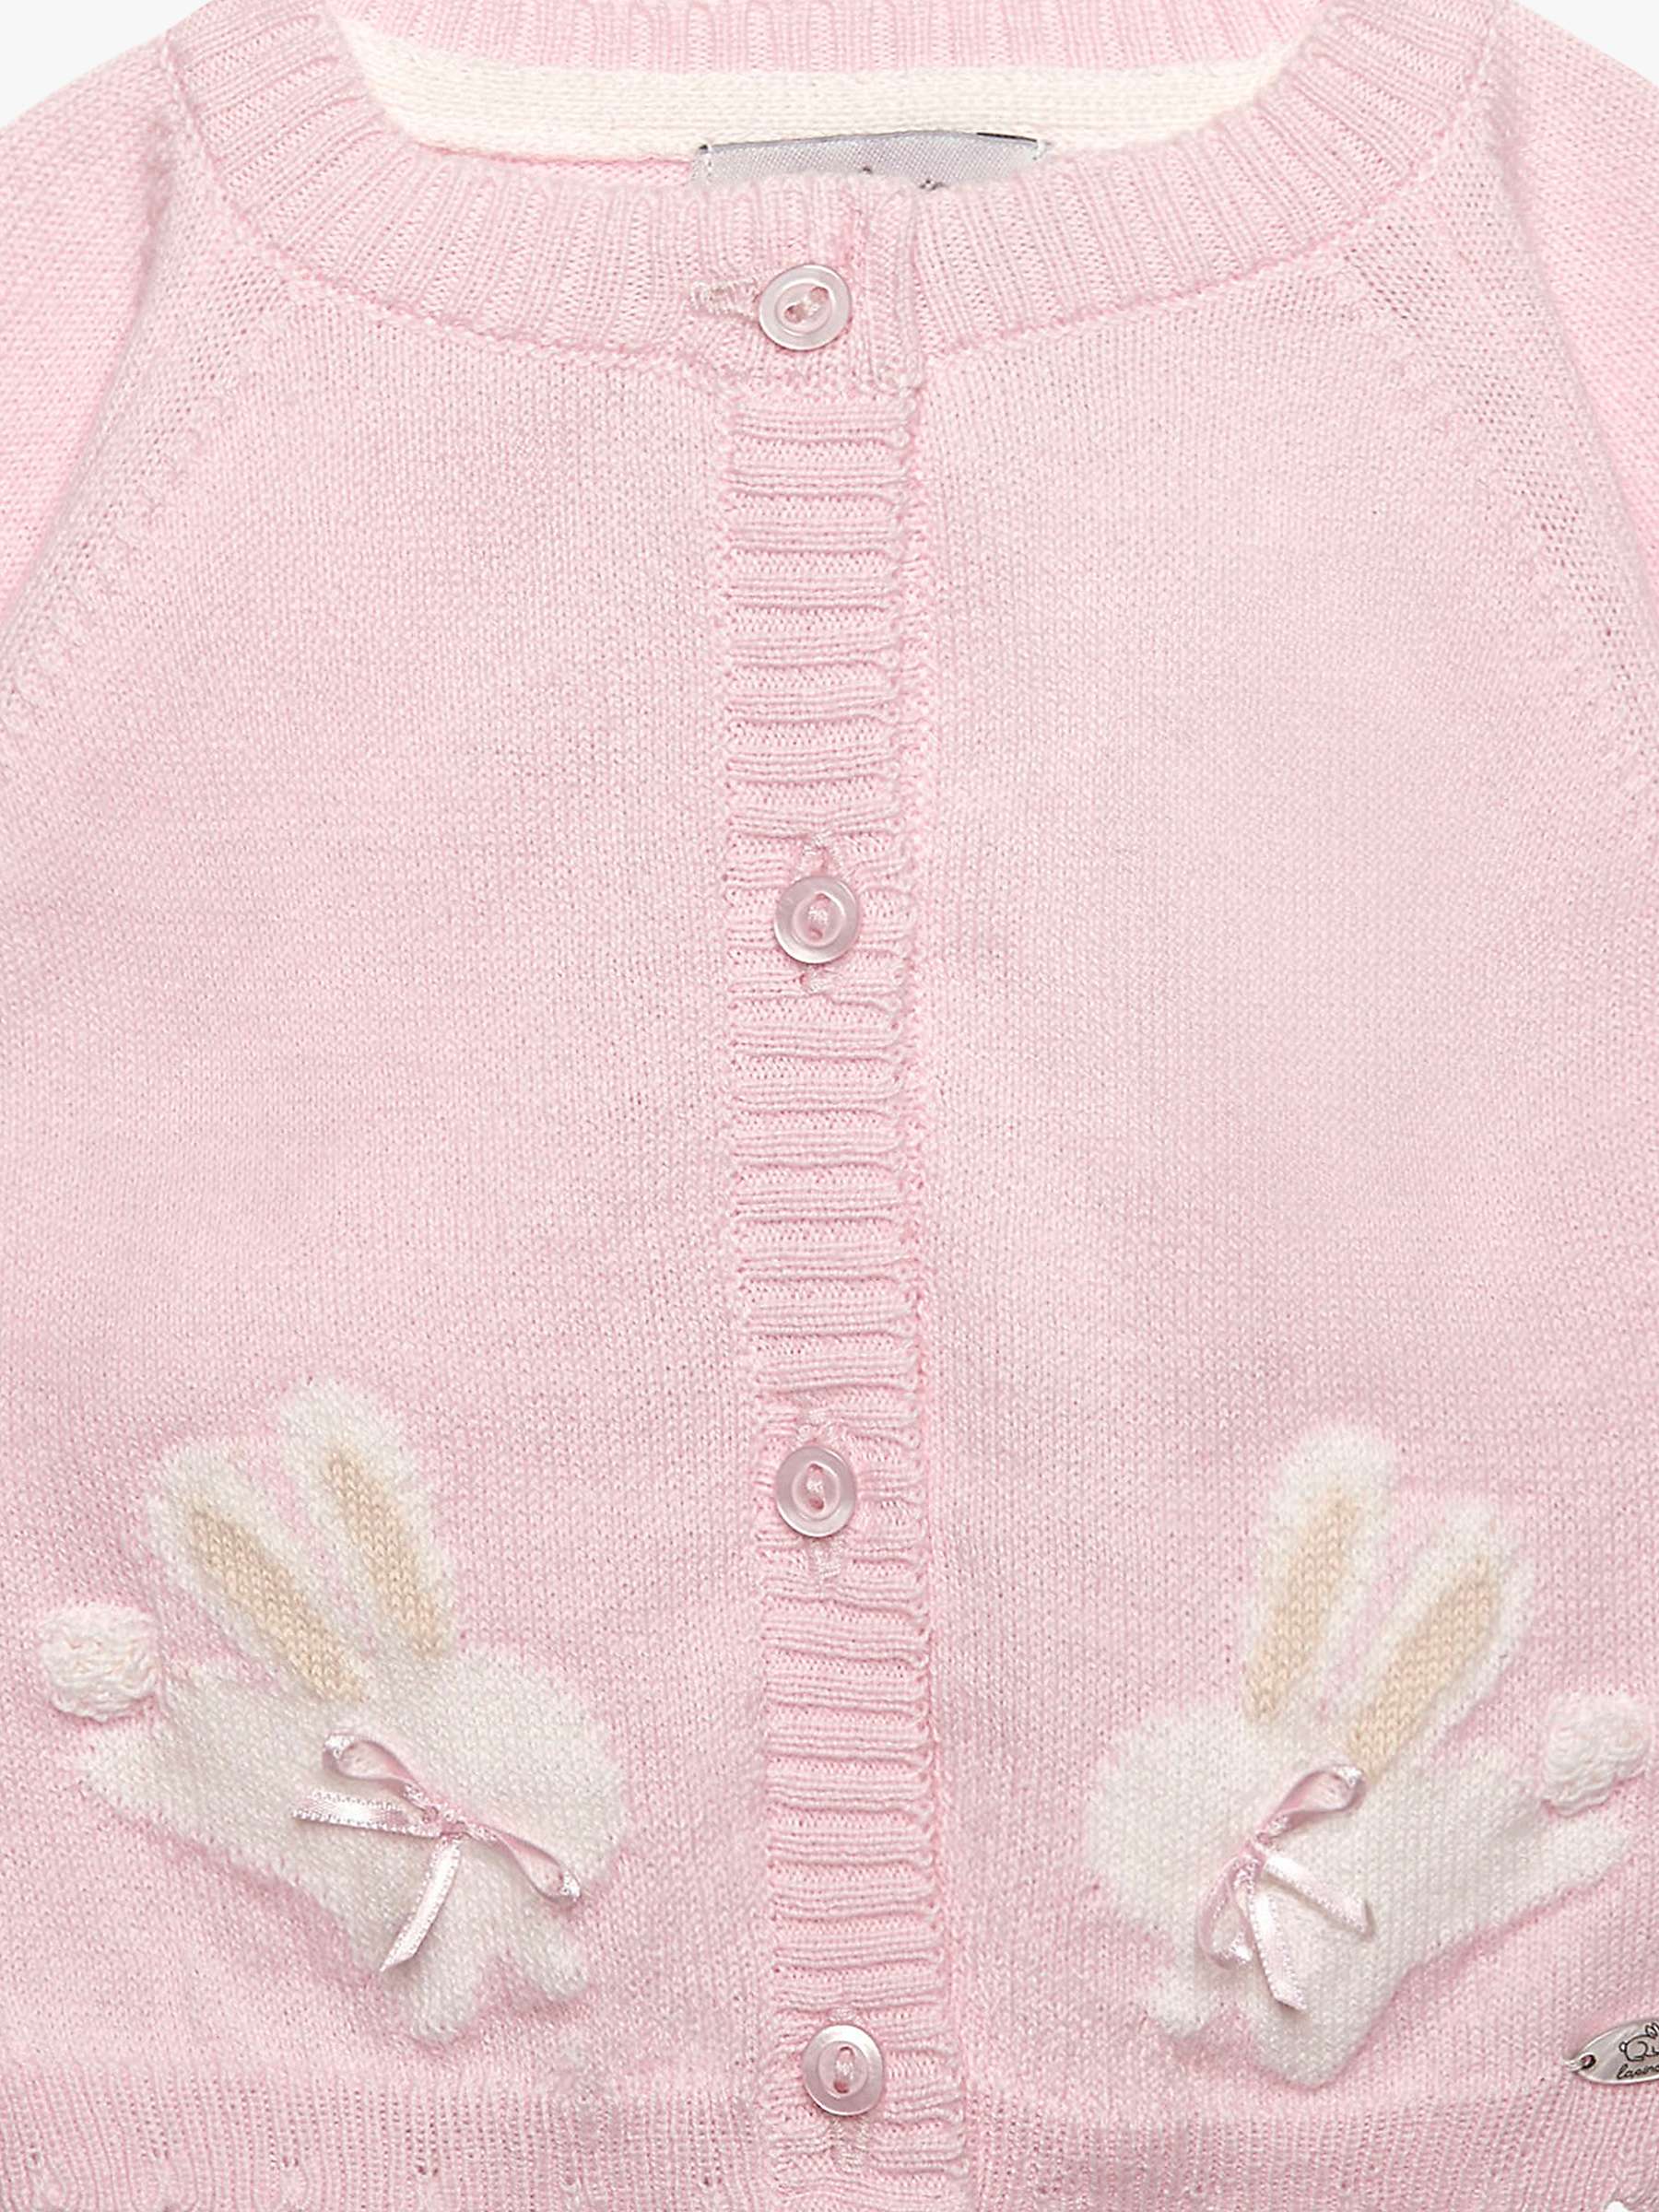 Buy Trotters Baby Wool Blend Flopsy Bunny Cardigan, Pale Pink Online at johnlewis.com